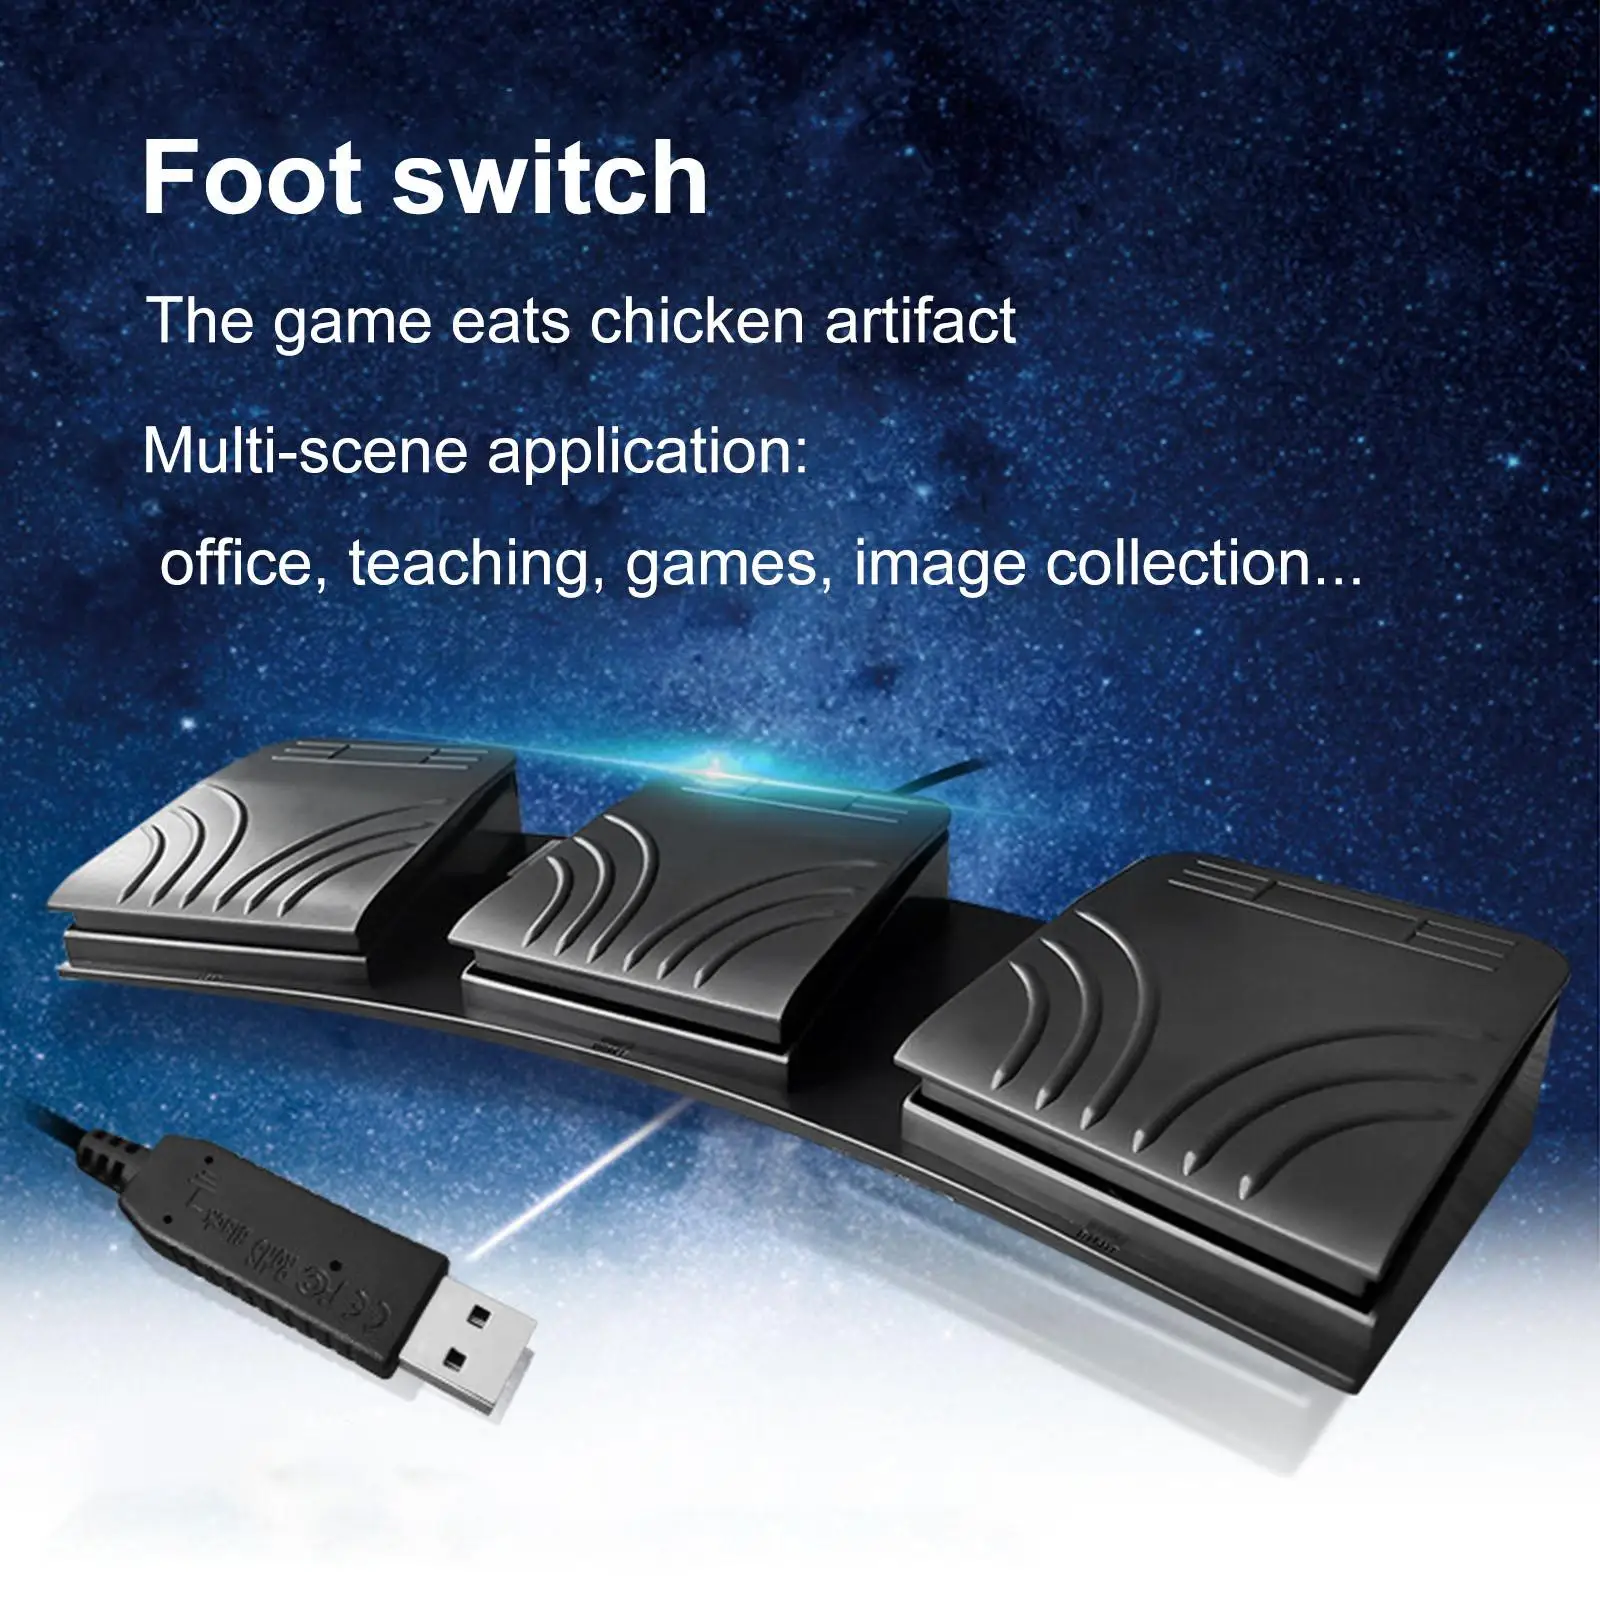 Upgraded USB Triple Foot Pedal Game Control Action Footswitch for Mouse Office Equipment Gaming Equipment PC Laptop